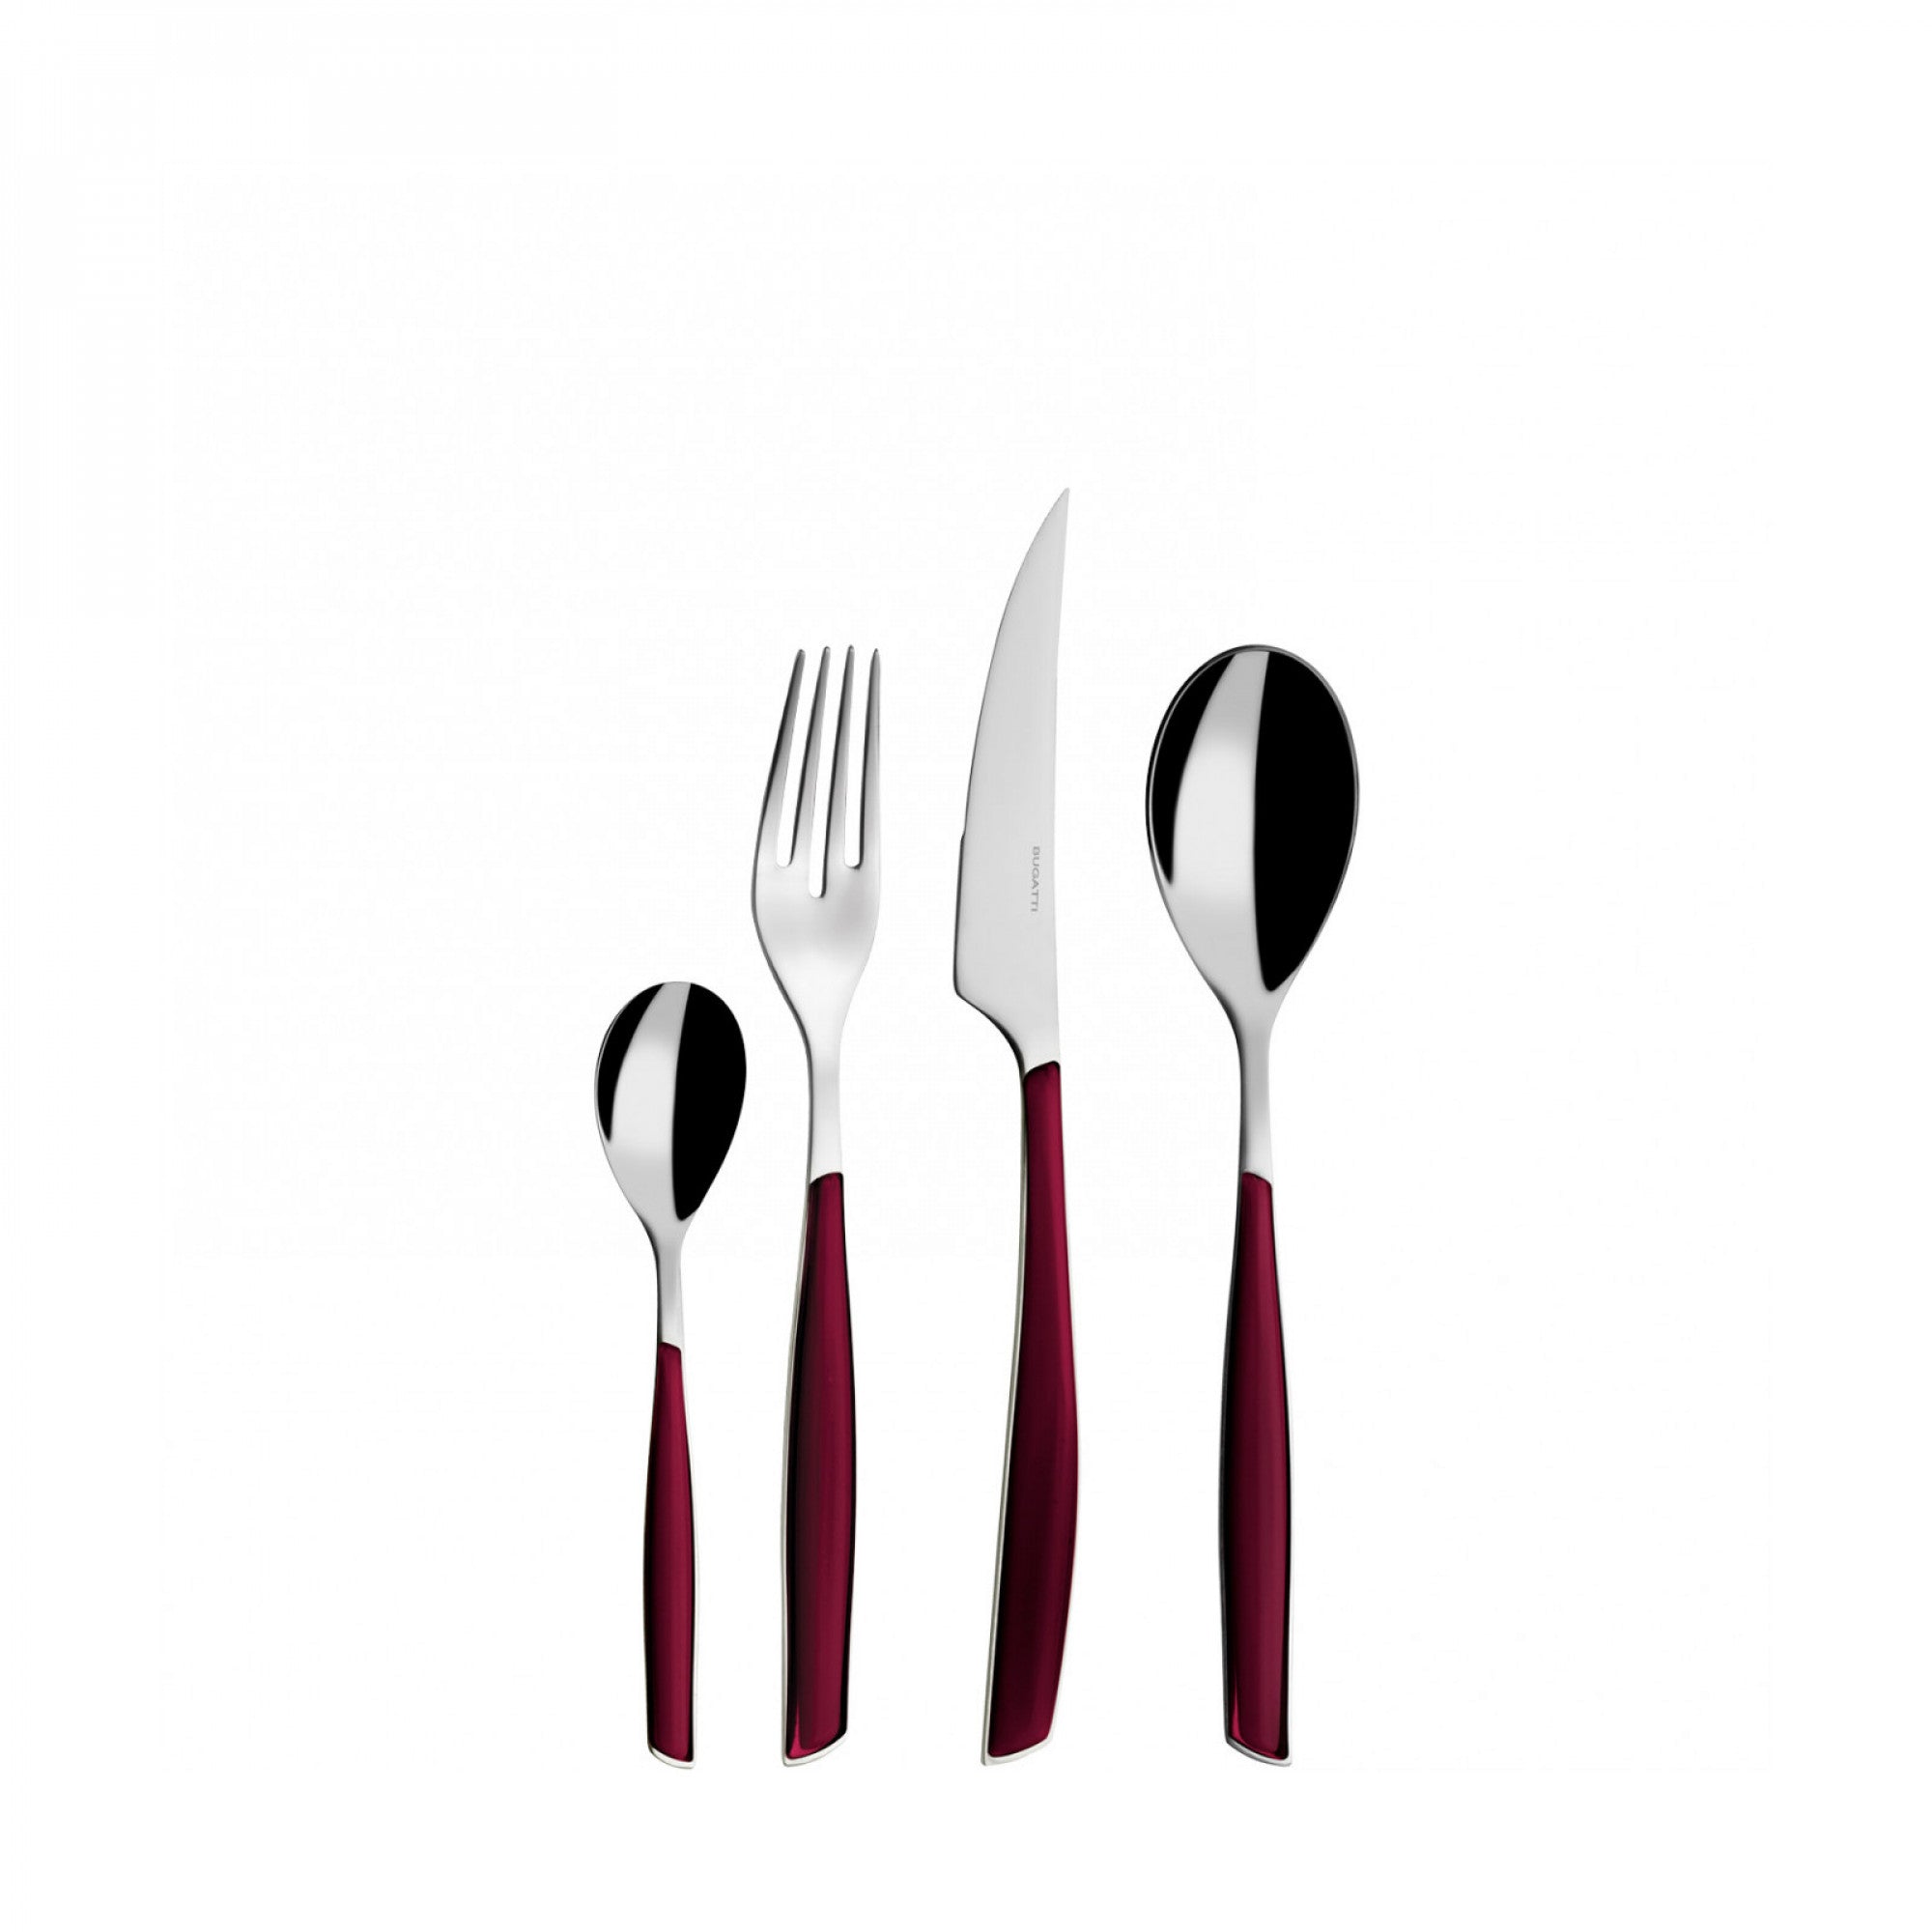 BUGATTI, Glamour, 24-piece cutlery set in 18/10 stainless steel. Packaged in Glamor box with windows